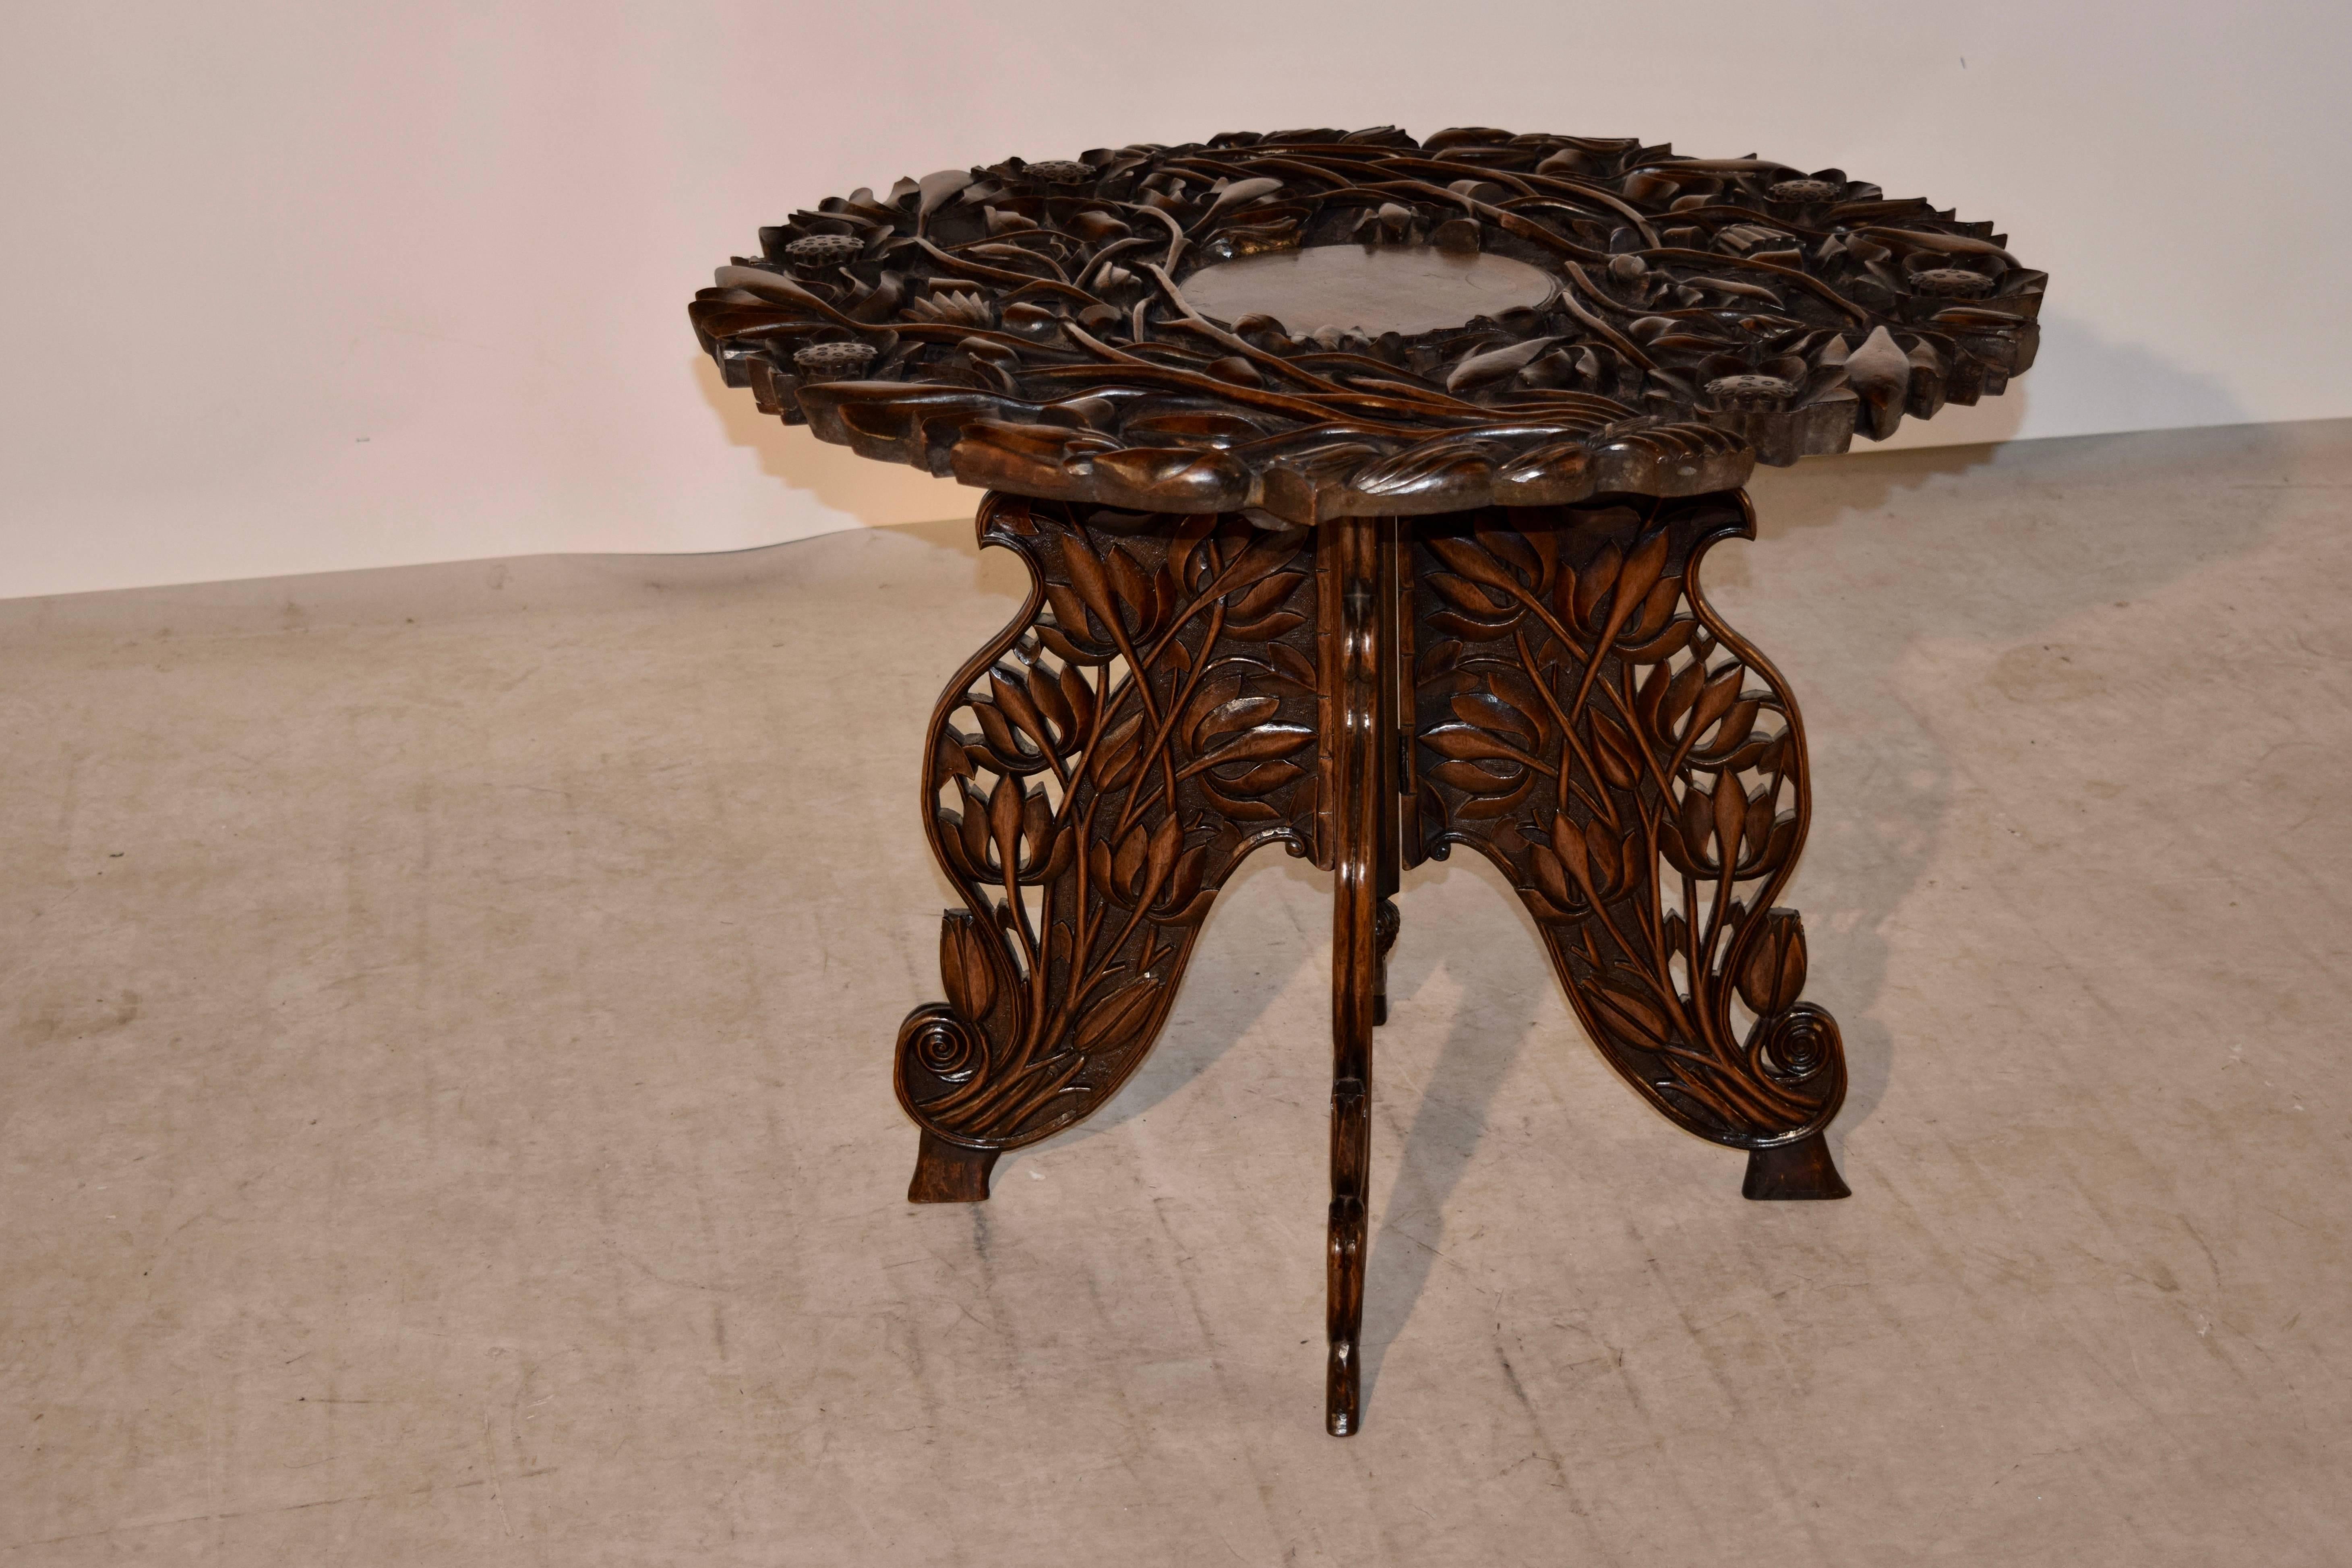 19th century Anglo-Indian side table with exquisite hand-carved designs of relieved vines and florals surrounding the top and continuing down the base and legs. The tabletop is removable and the base folds for easier transport.